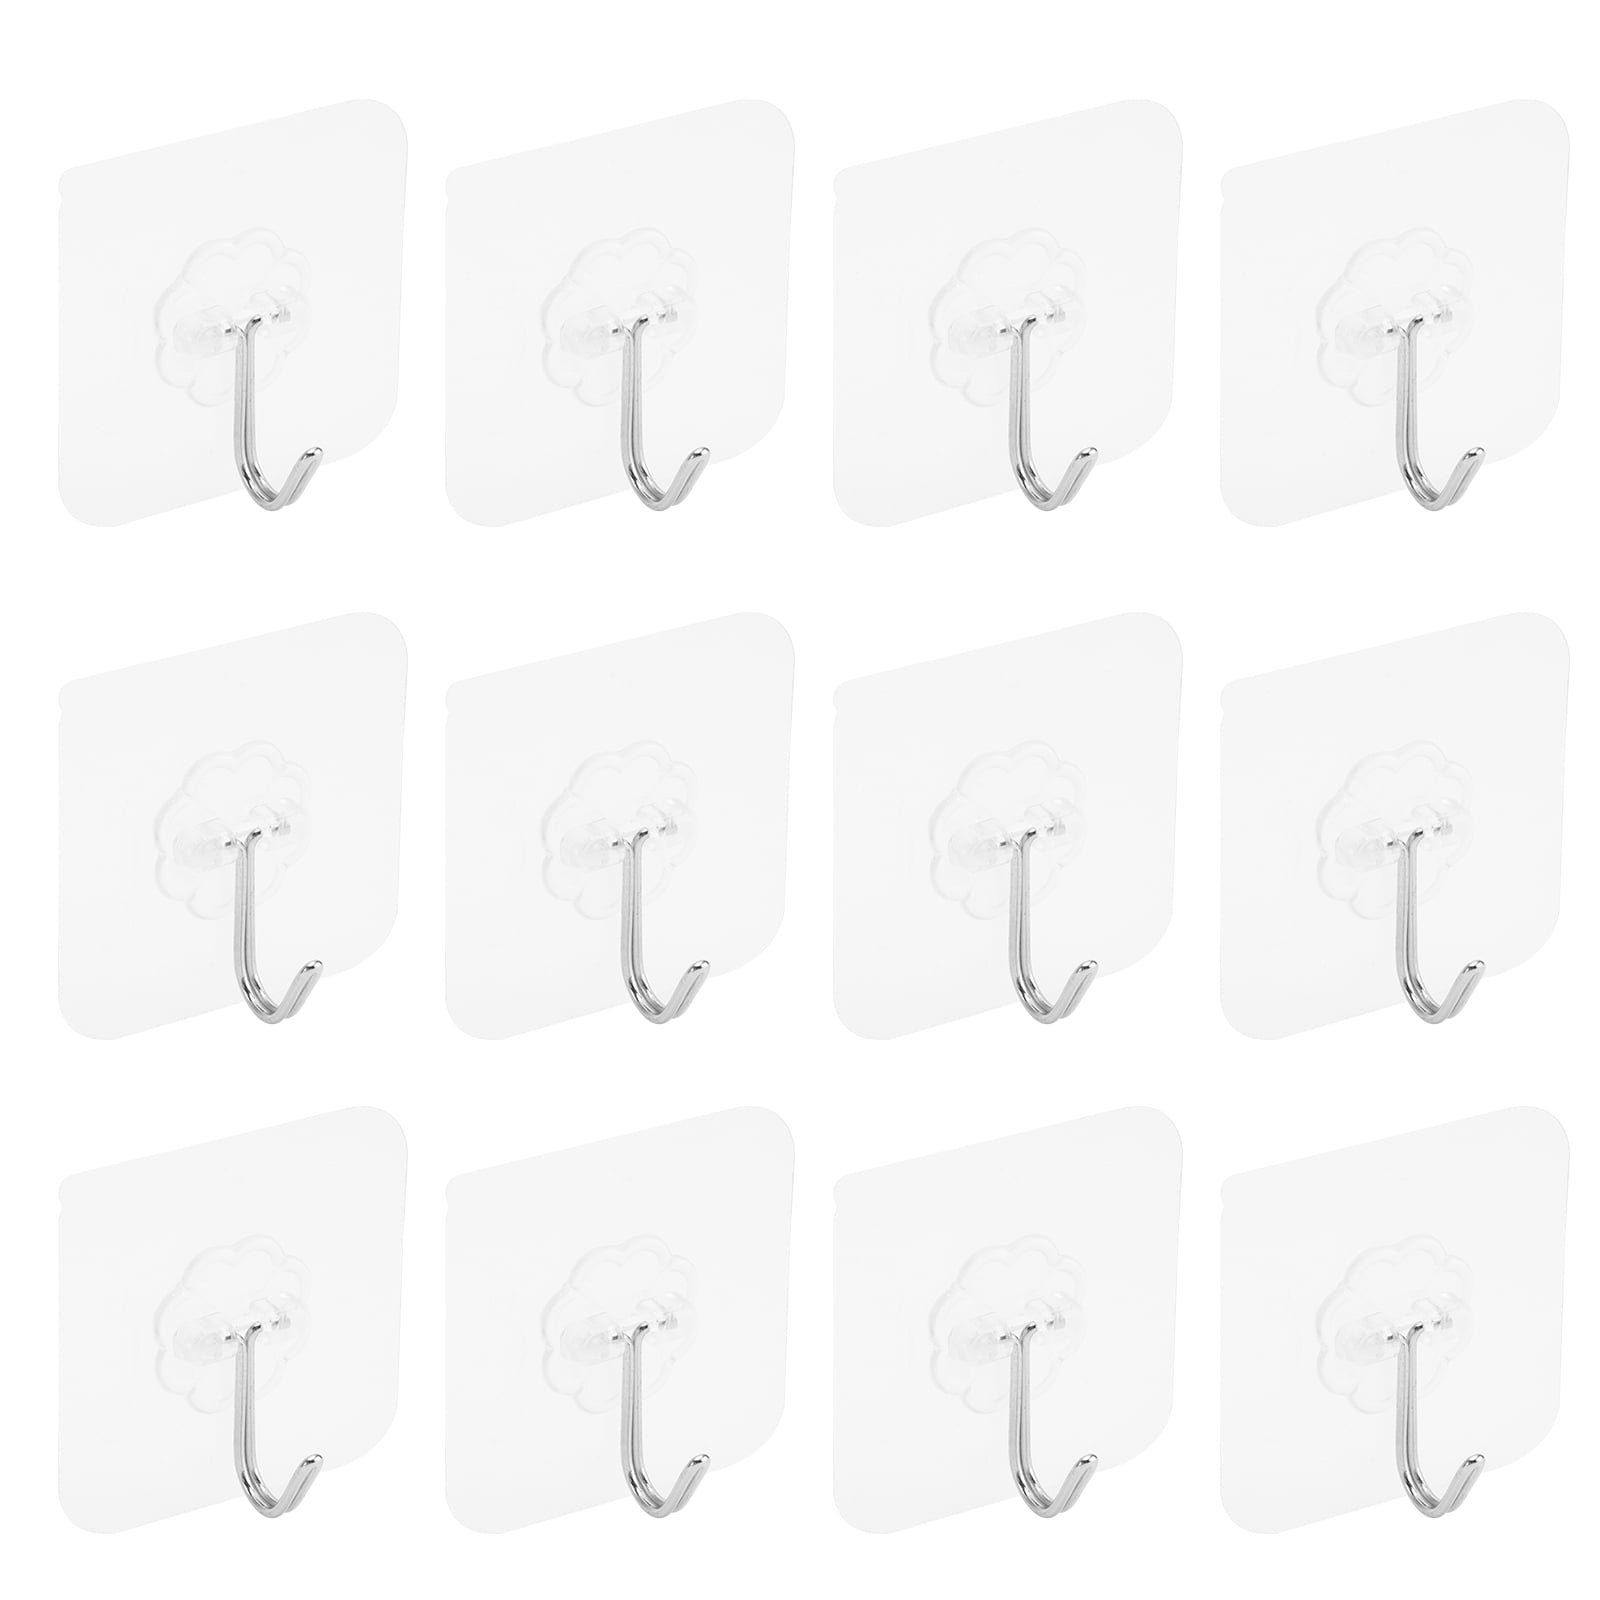 NUOLUX 12pcs Self Adhesive Hooks Stainless Steel Strong Sticky Wall Hanger 